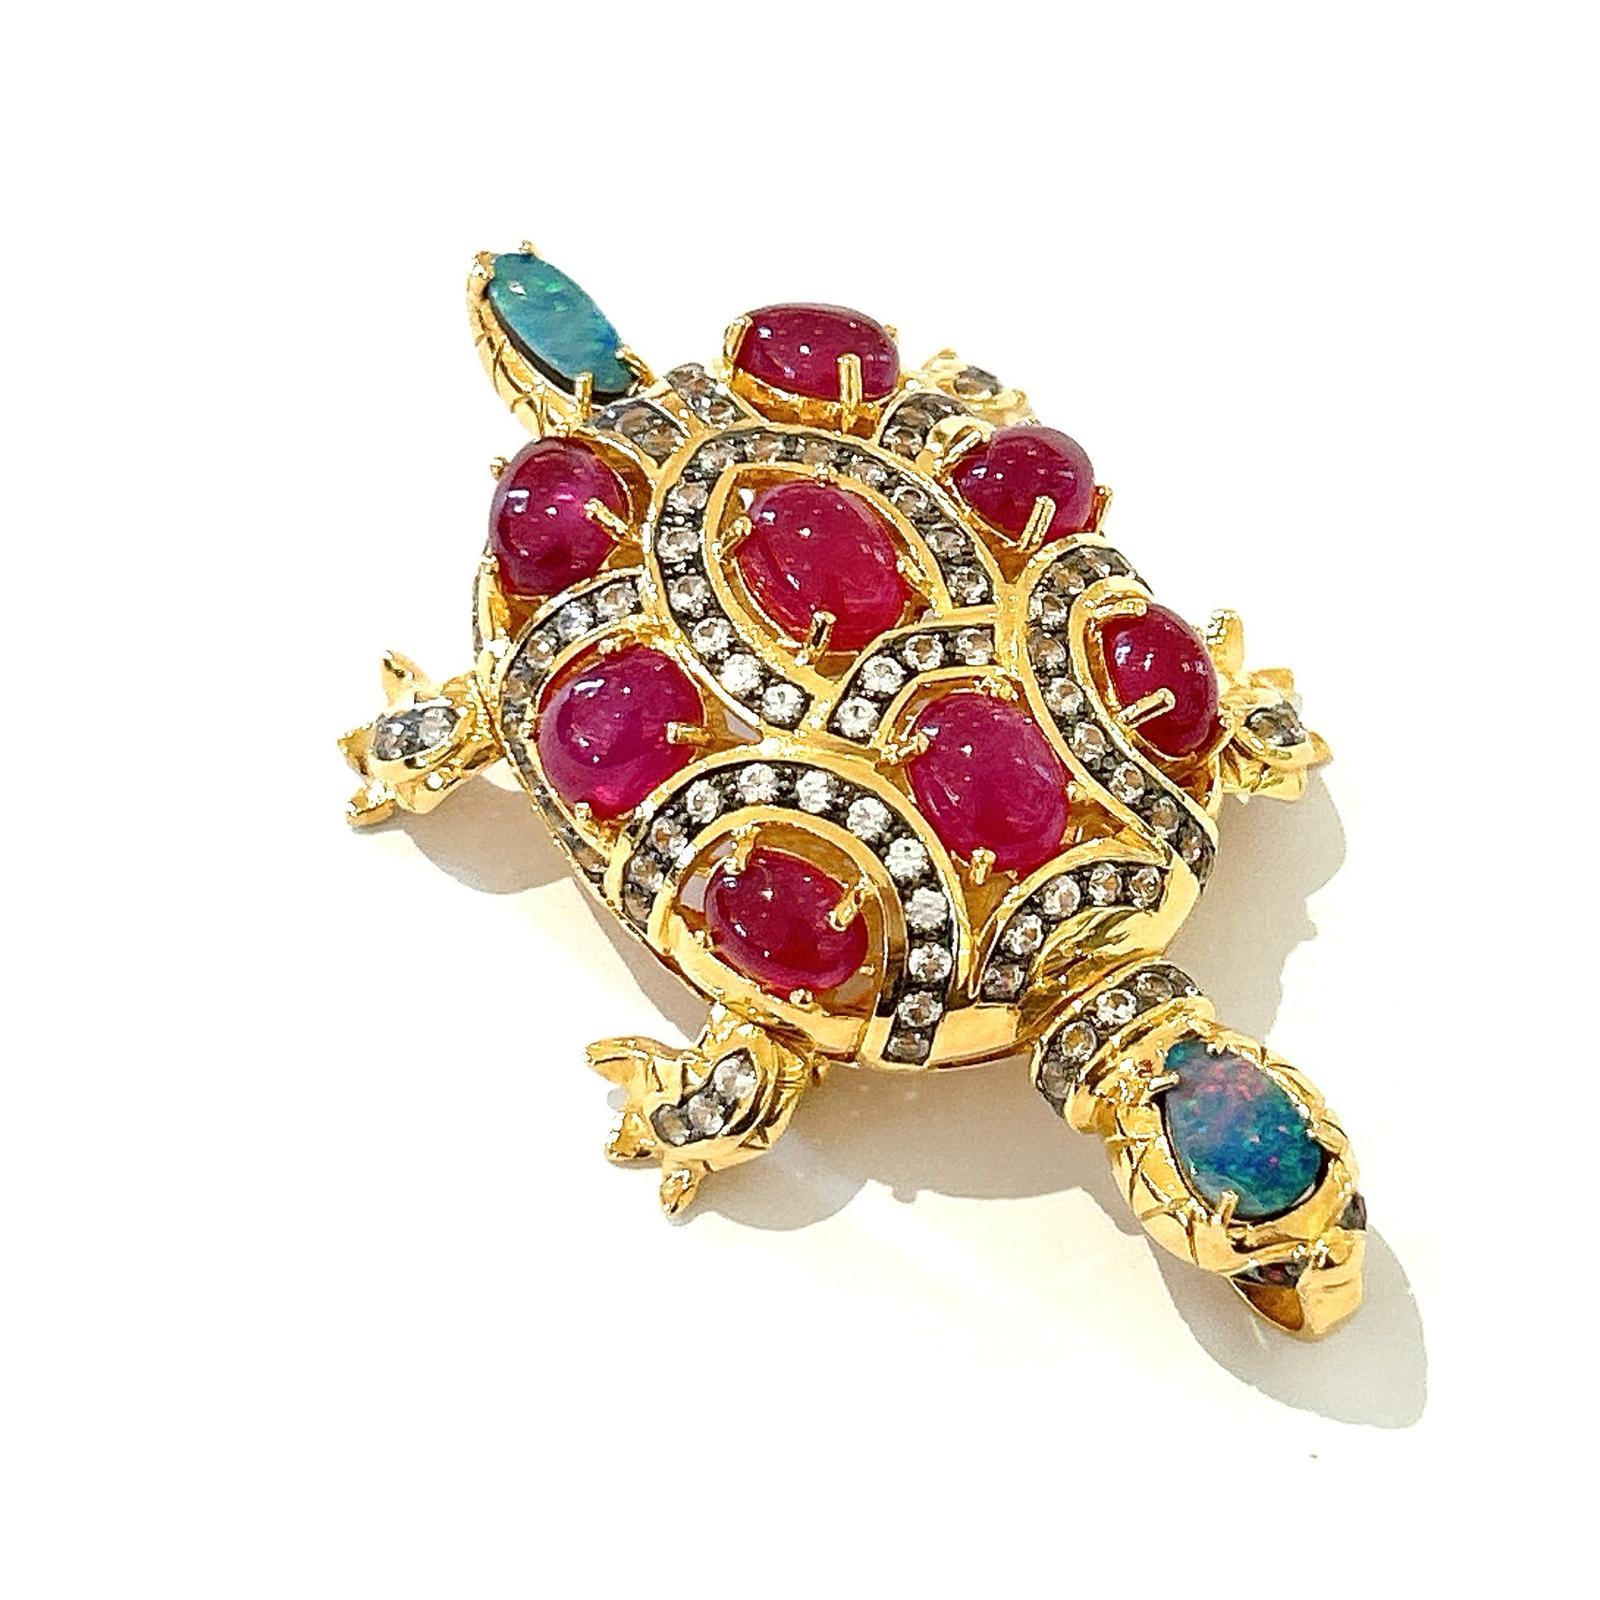 Bochic “Orient” Retro Multi Ruby, Topaz & Opal Brooch Set In 18K Gold & Silver  In New Condition For Sale In New York, NY